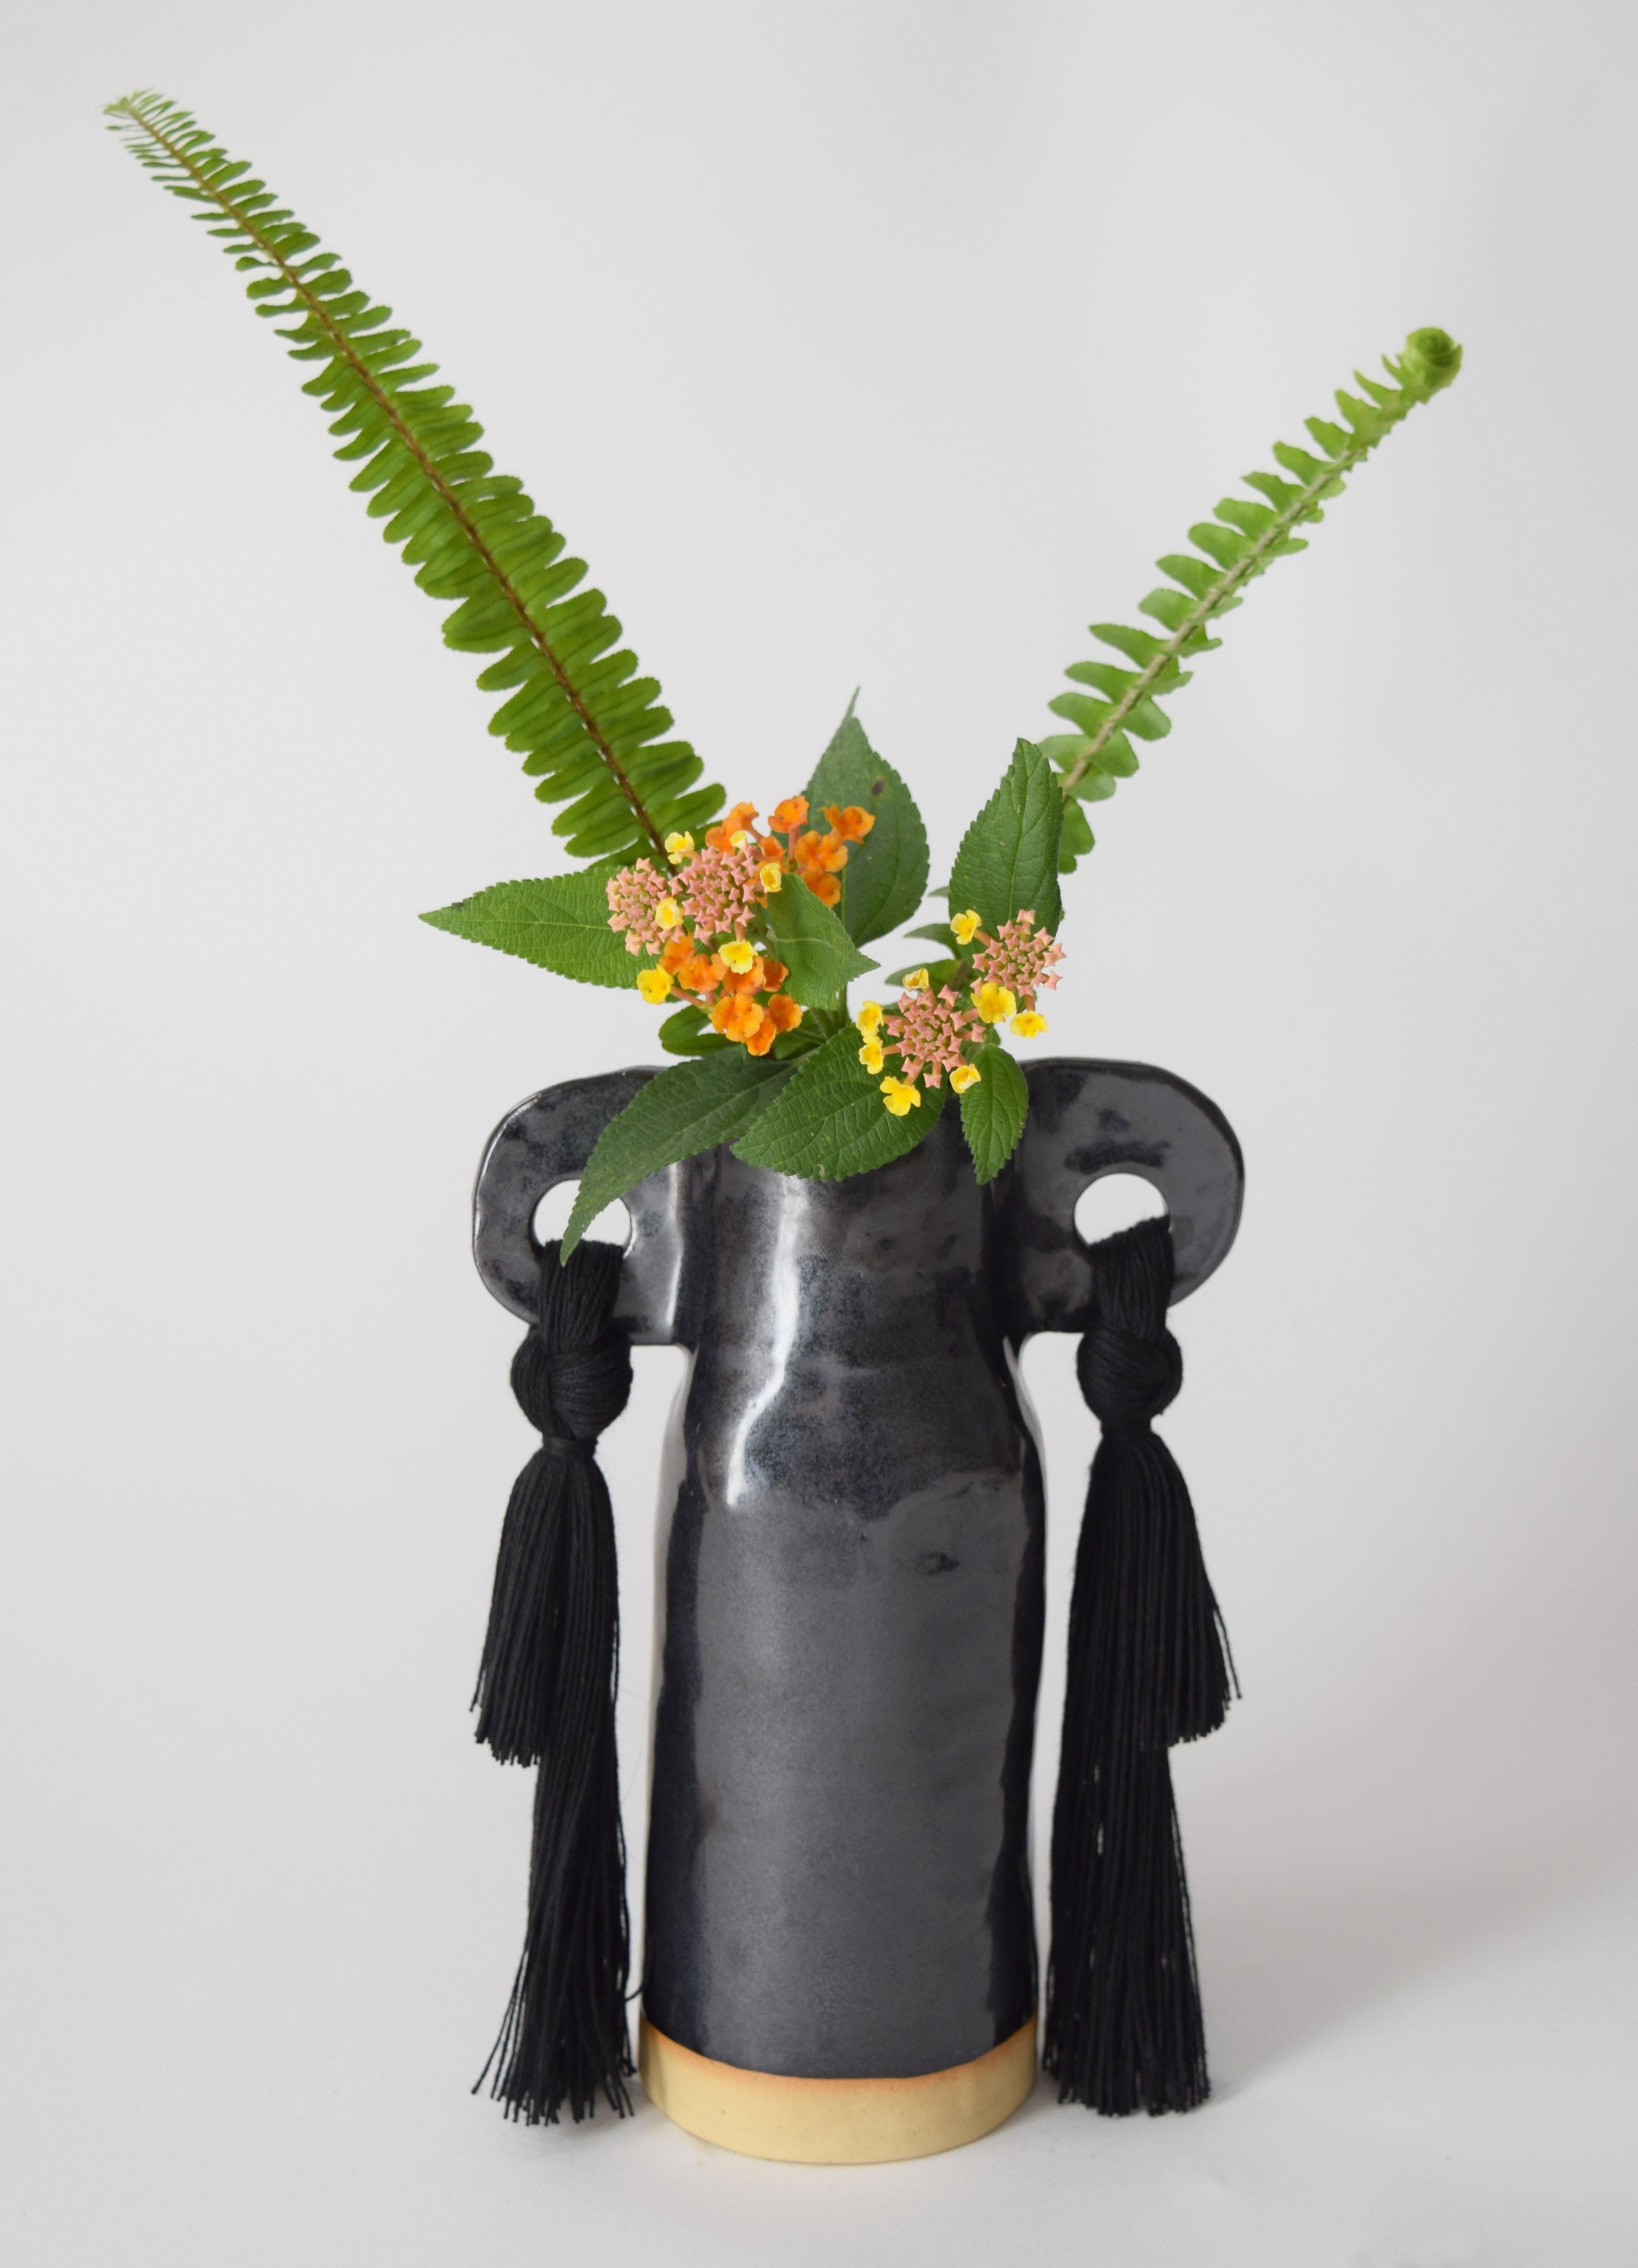 Vase #606 by Karen Gayle Tinney

A petite vase perfectly sized to stand alone in a small space or act as a companion to a larger piece. Each vase is formed by hand, making every piece unique.

Stoneware with black glaze. Black cotton fringe